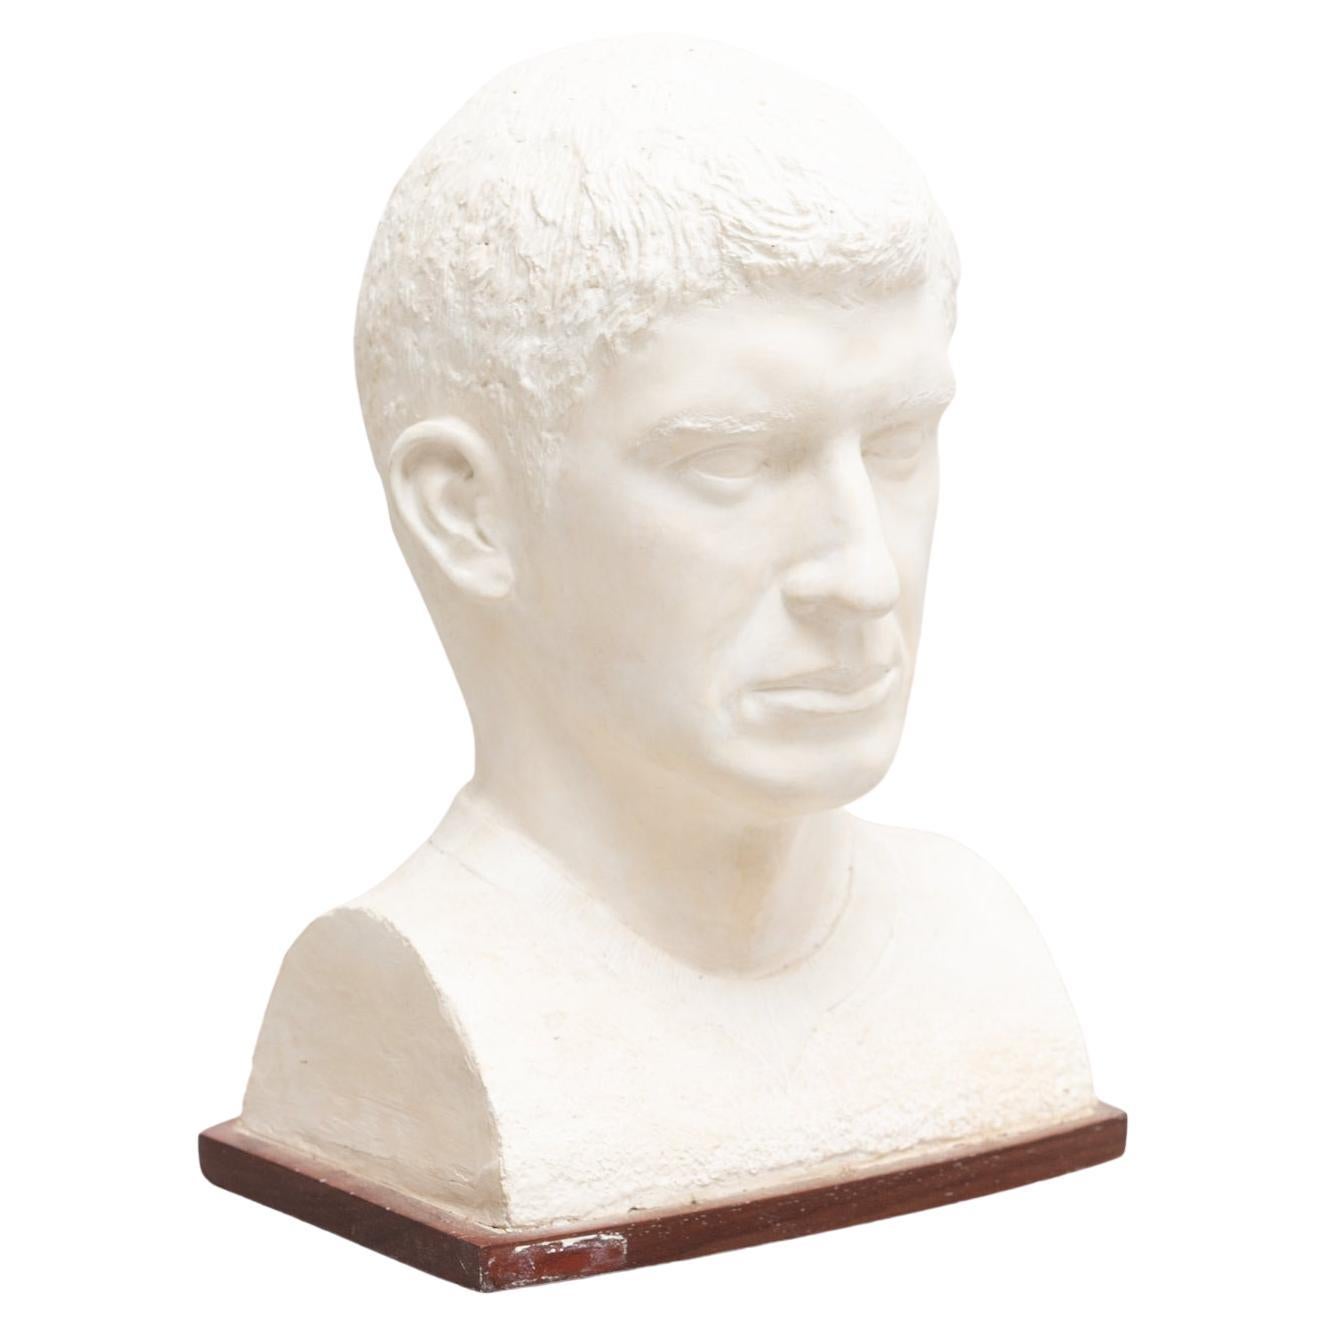 Plaster Bust Sculpture From a Man by Unknown Artist, circa 1960